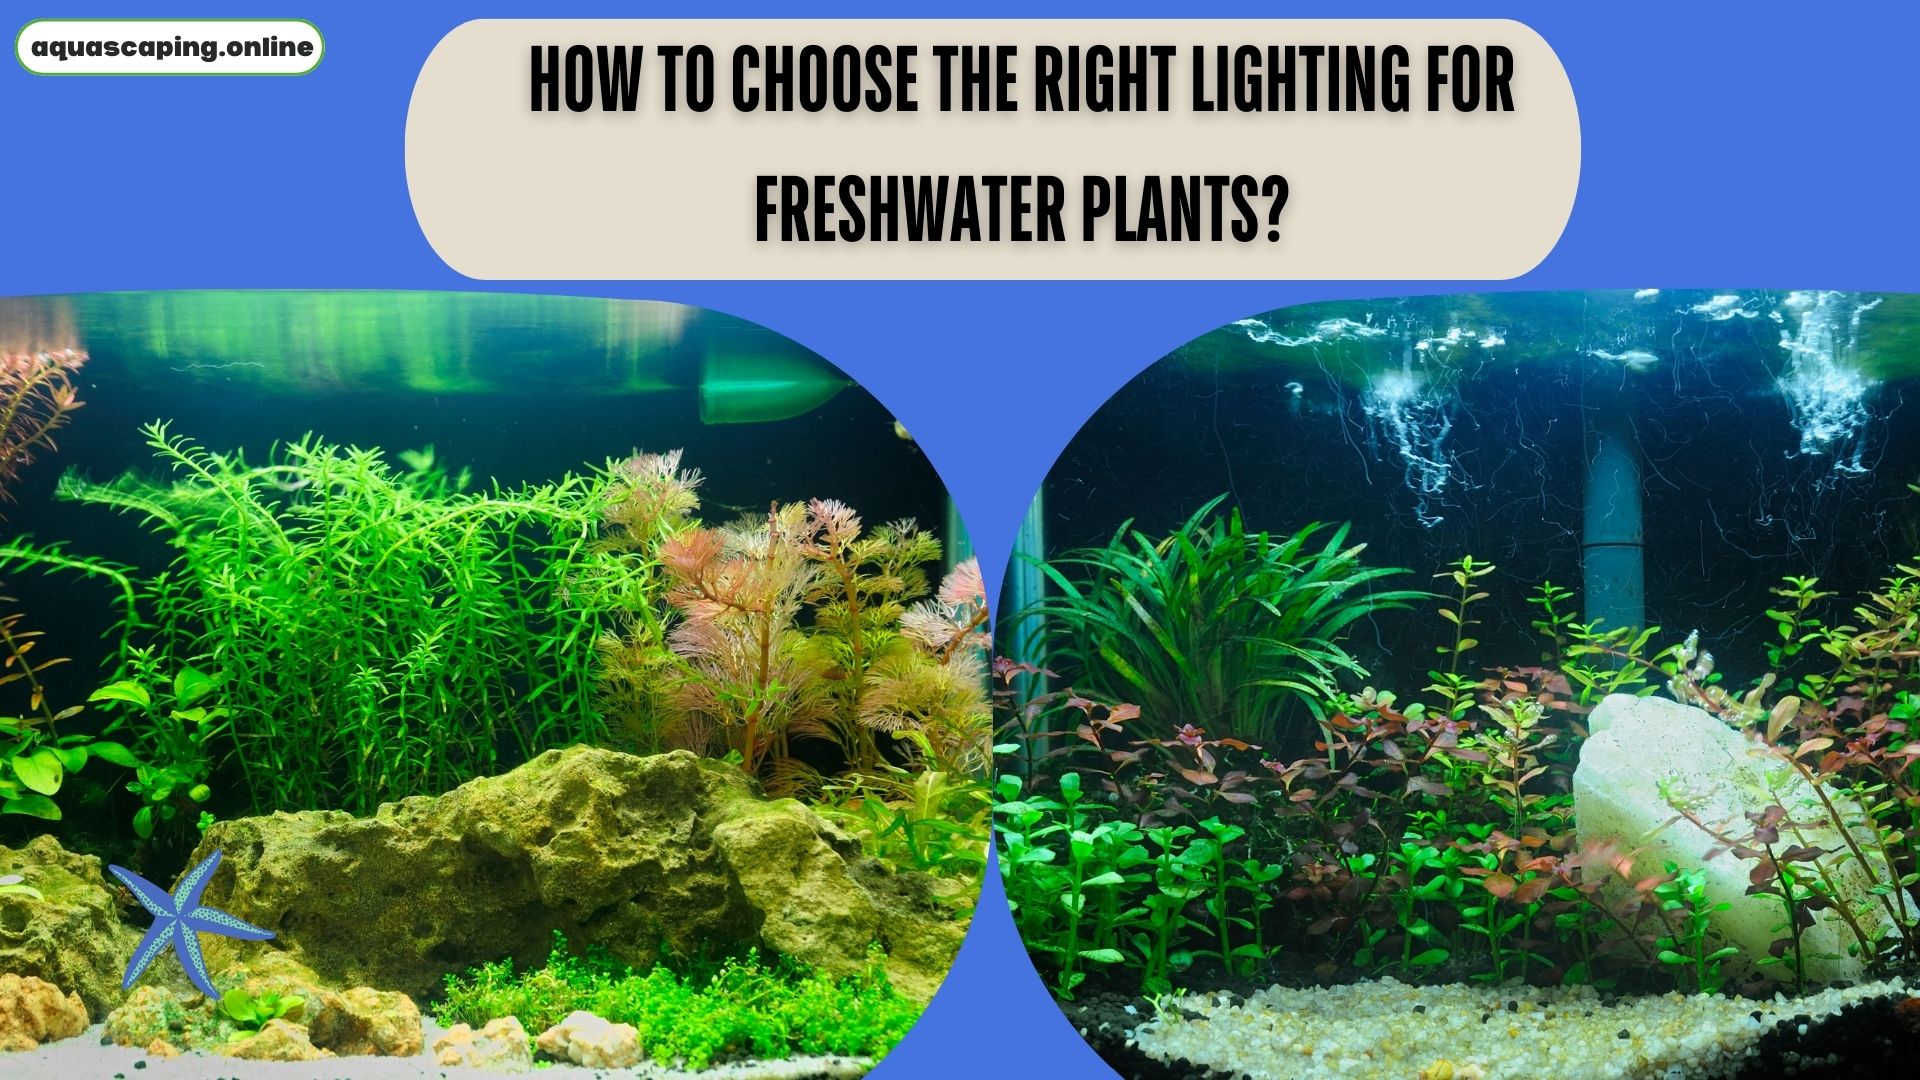 The right lighting for freshwater plants